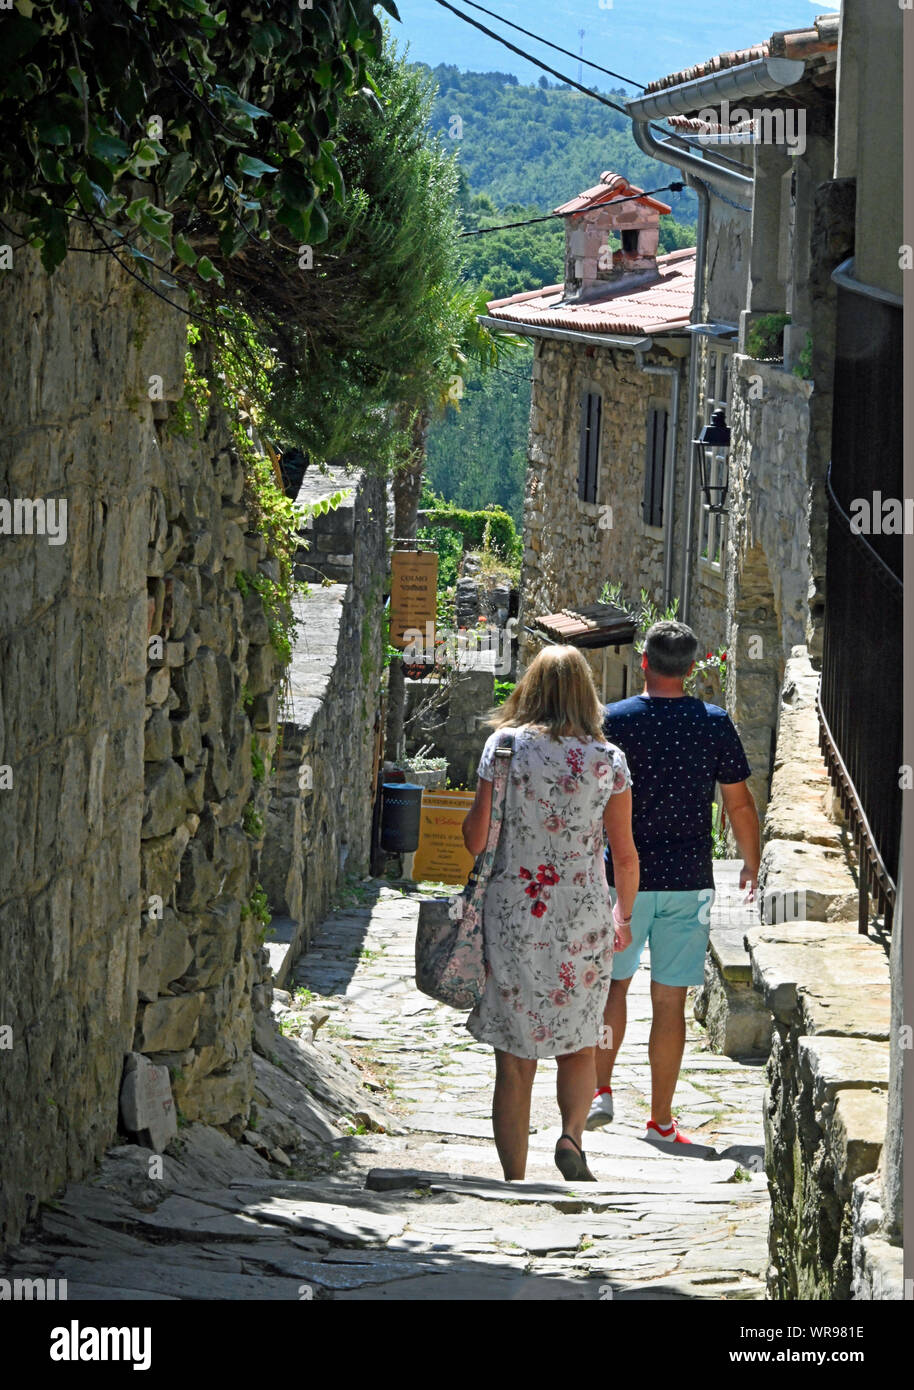 'The world's smallest town', Hum, in Croatia Stock Photo